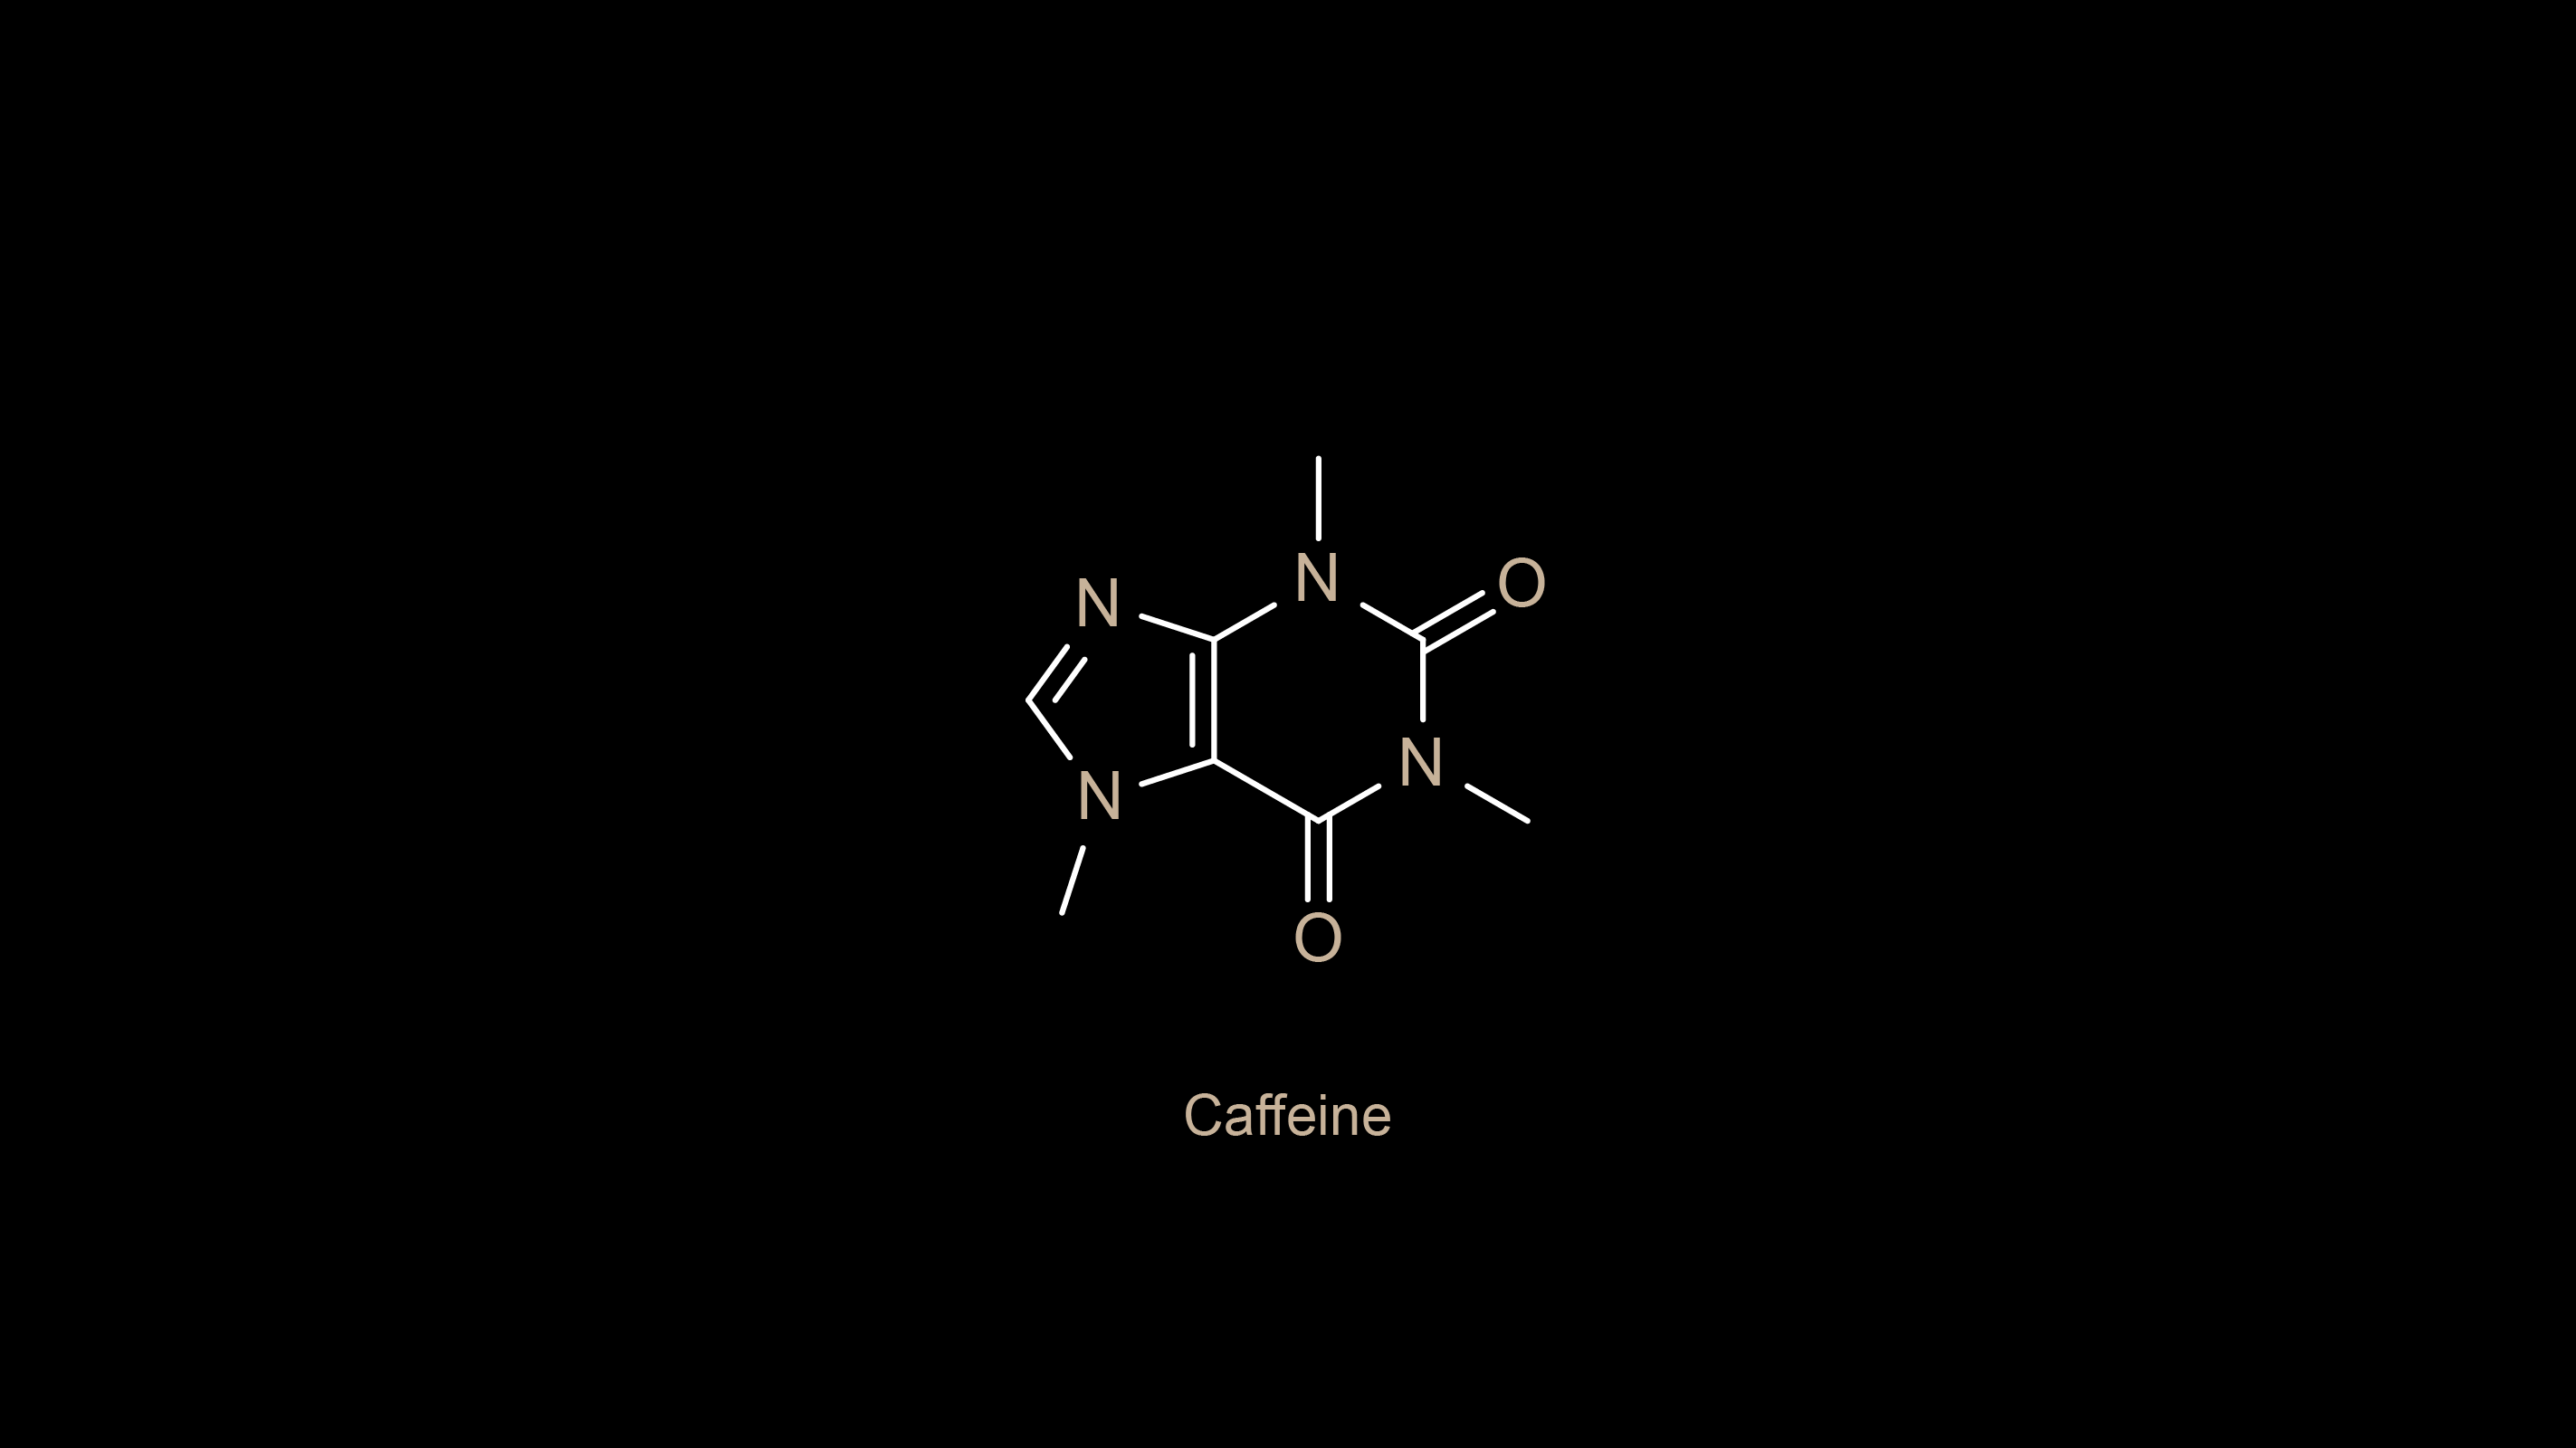 General 2846x1600 chemical structures minimalism science caffeine chemistry digital art caption text simple background